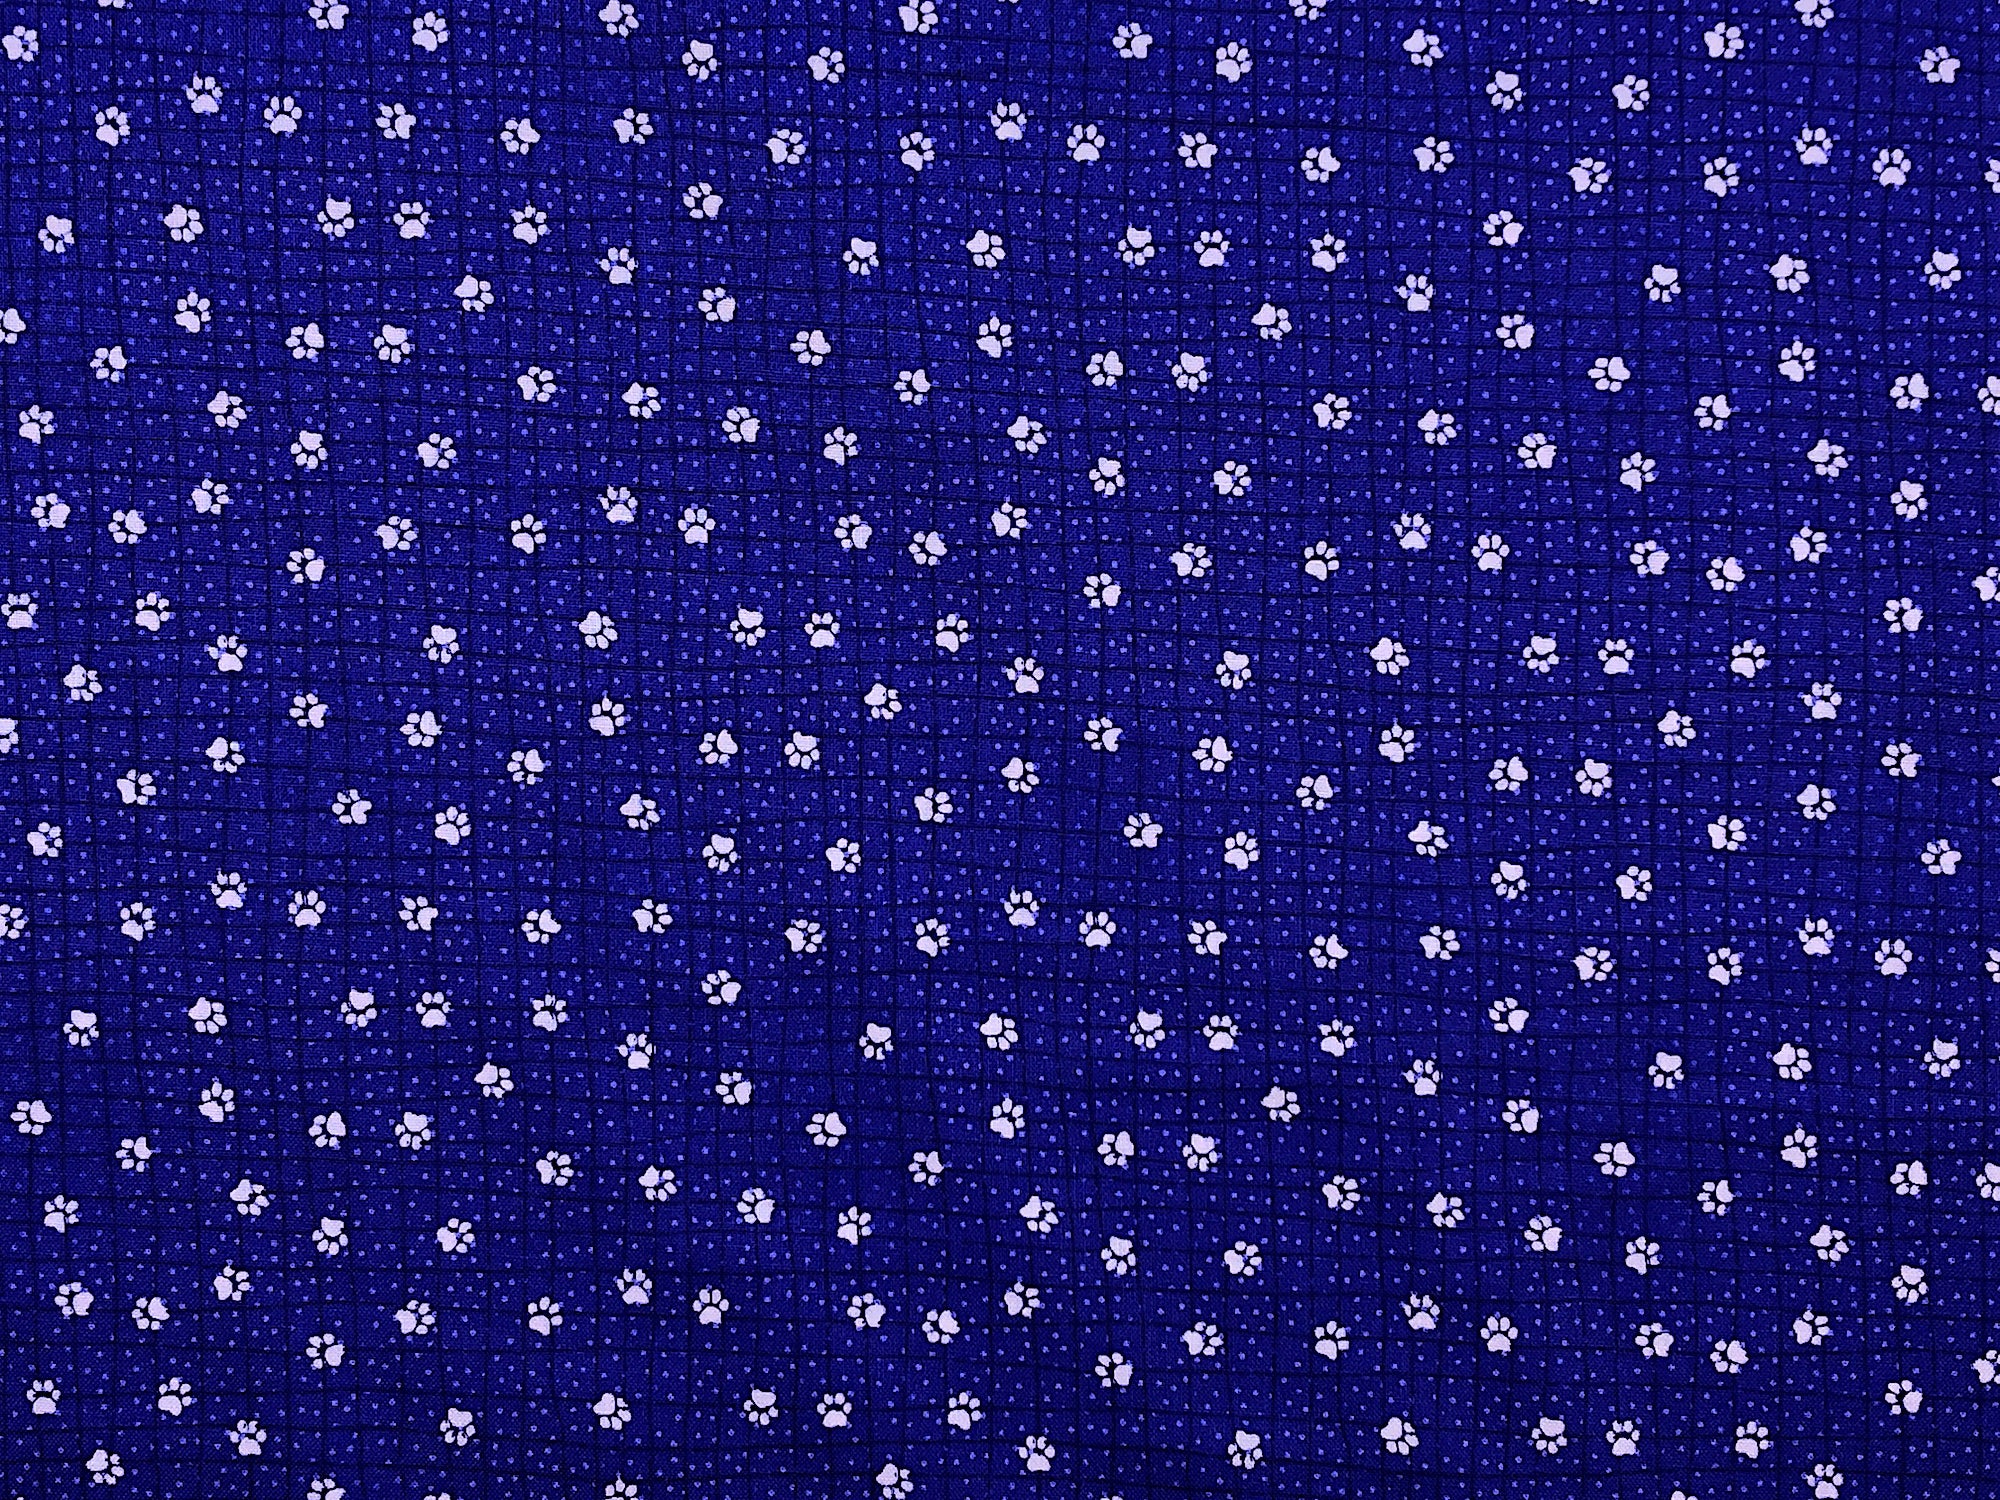 This blue fabric is covered with white paw prints.